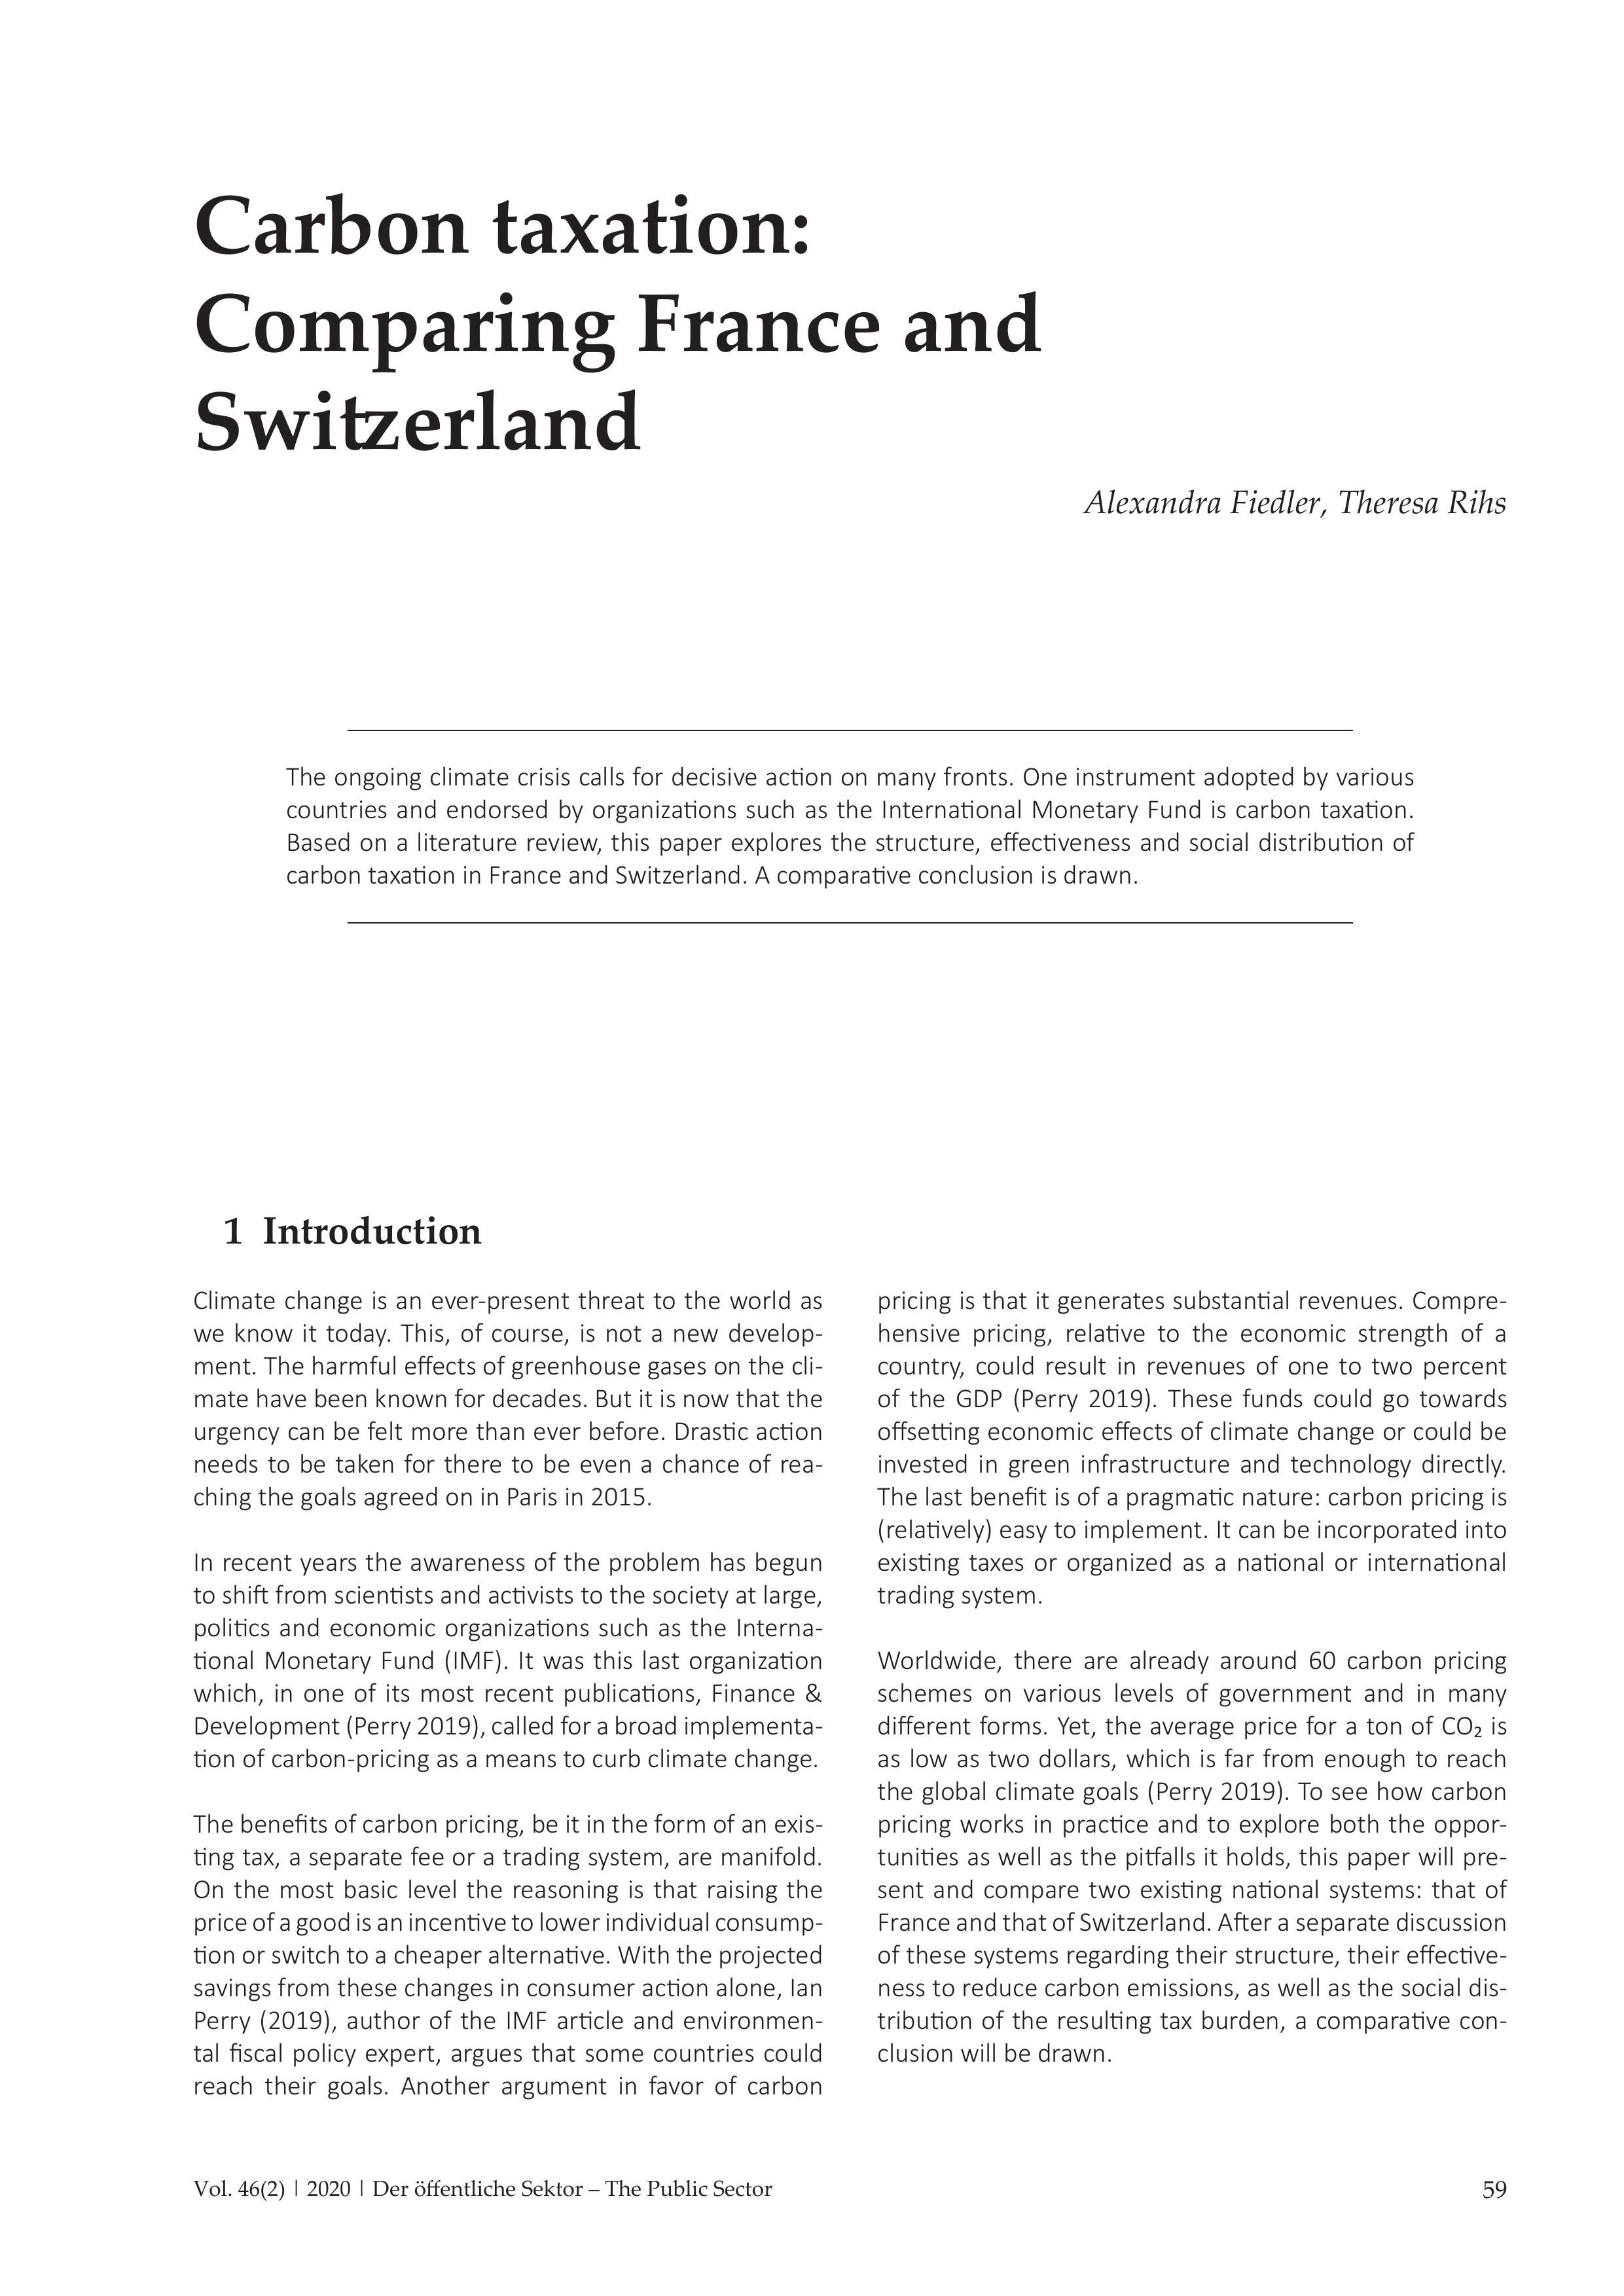 Carbon taxation: Comparing France and Switzerland